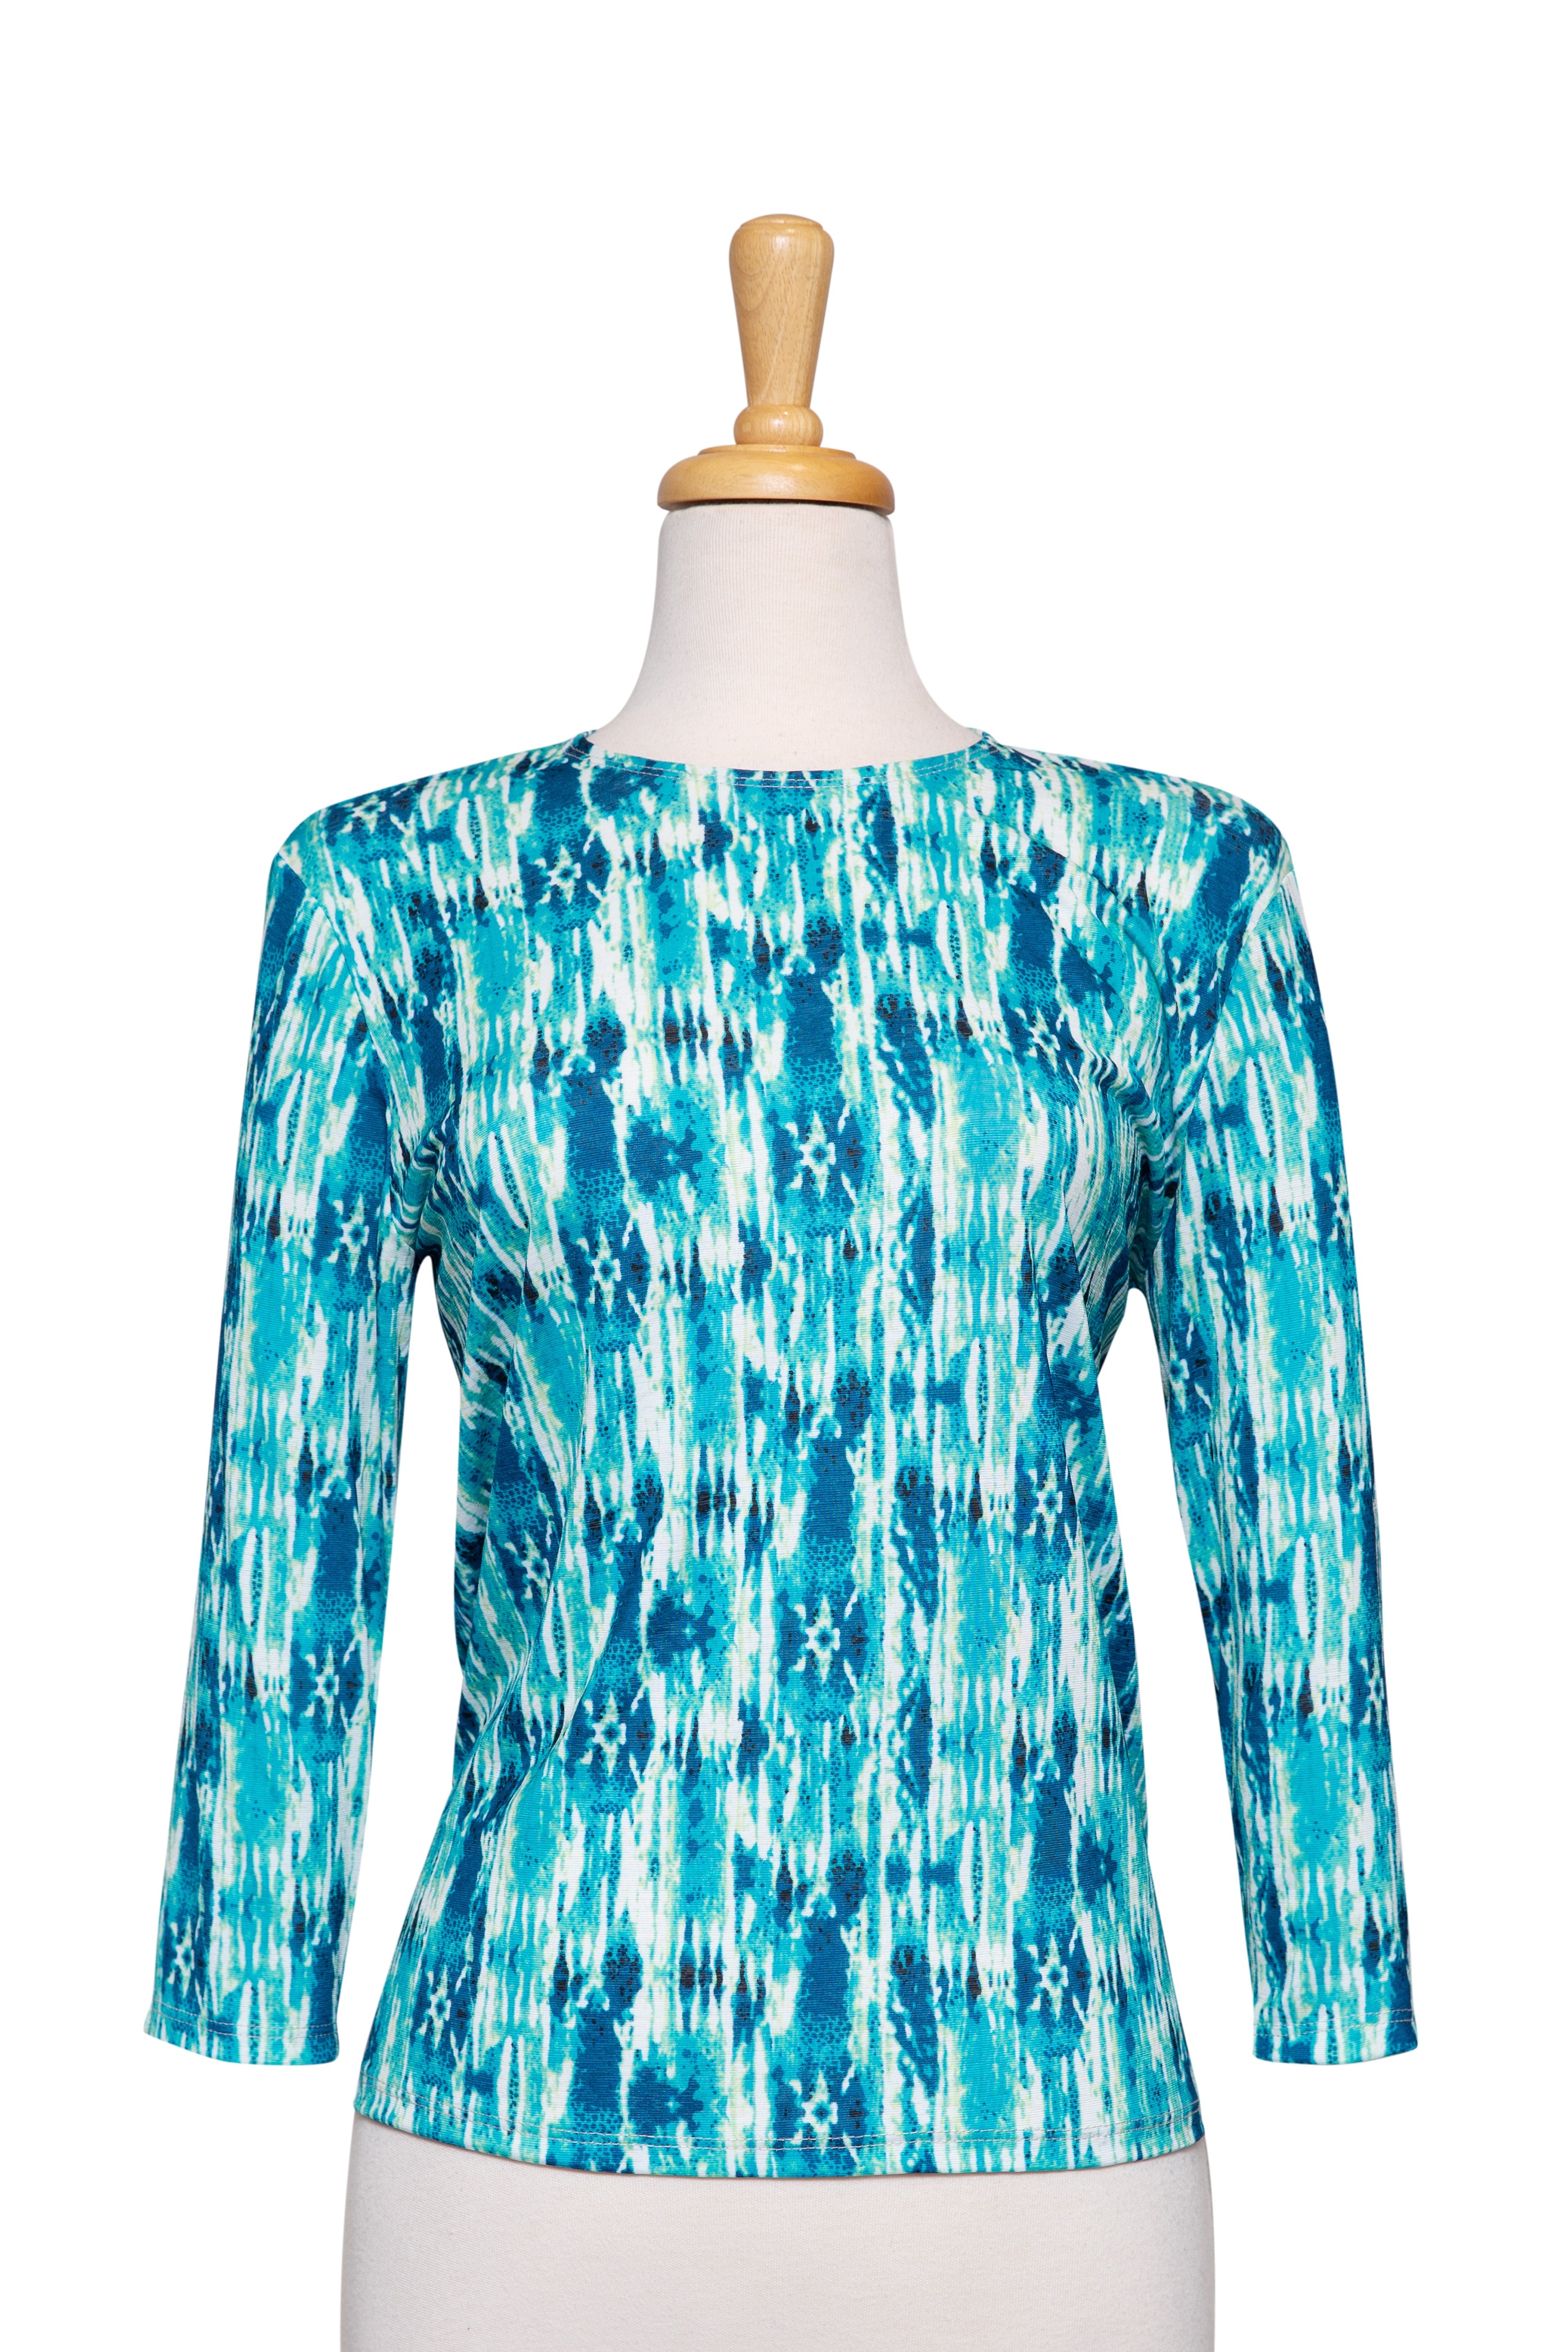 Teal, Blue and White Waterfall Microfiber 3/4 Sleeve Top 